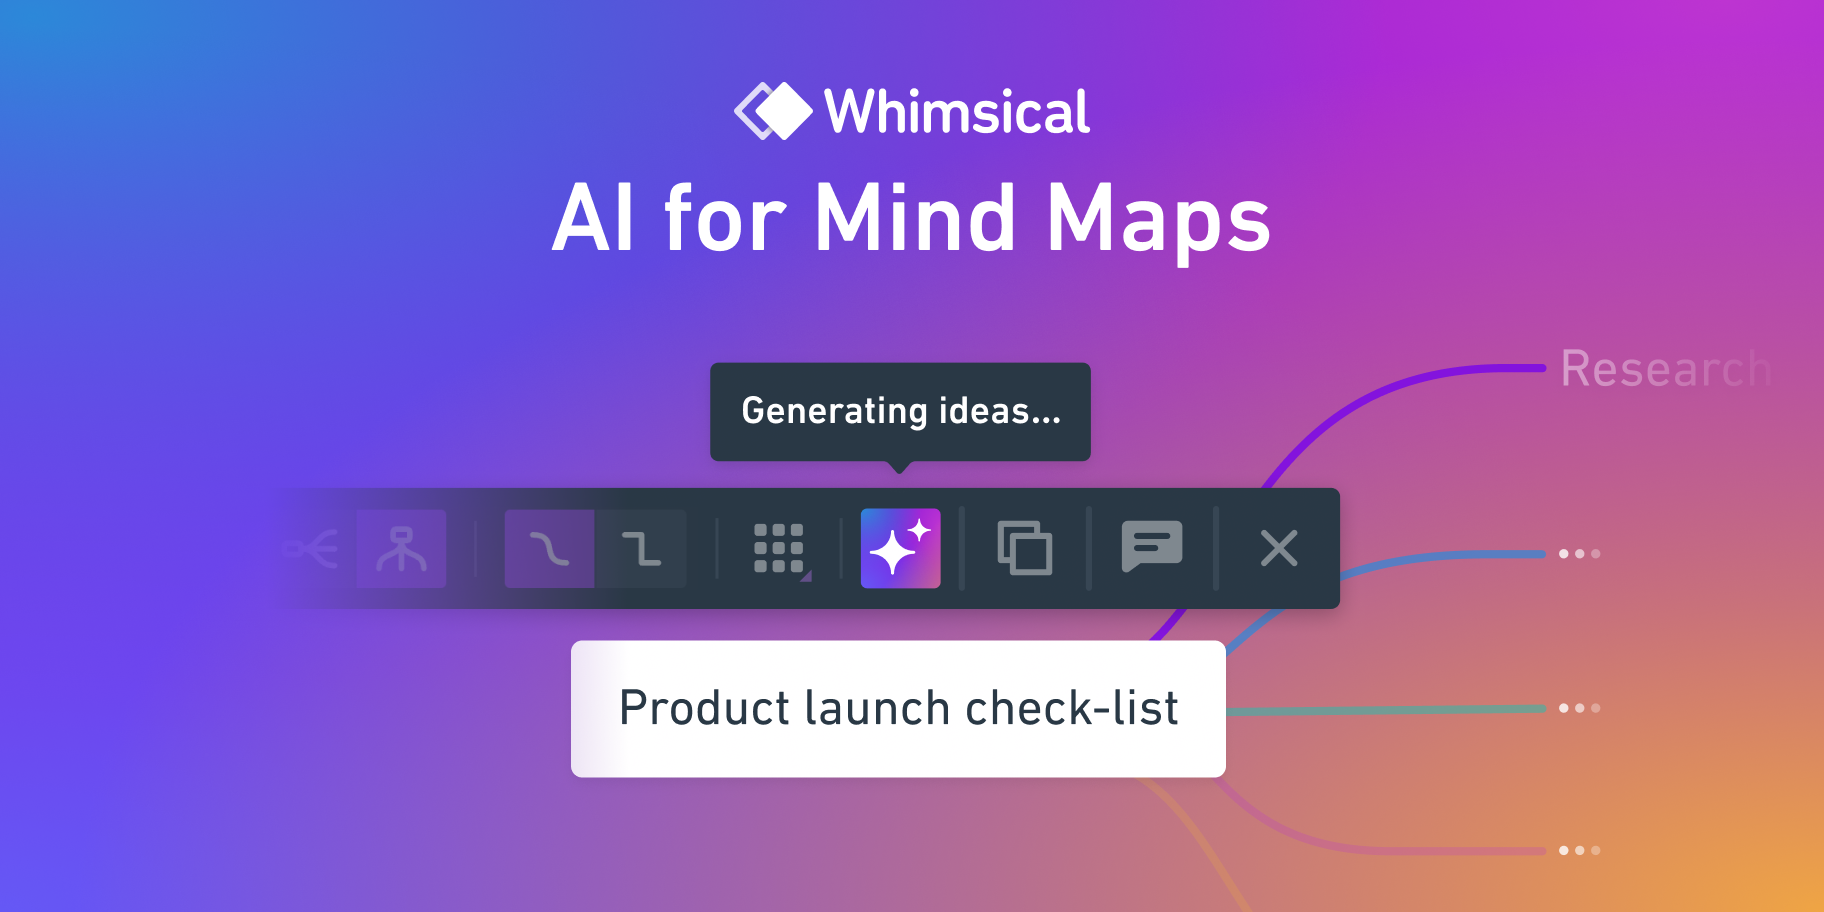 Whimsical AI - A tool for brainstorming and mind mapping